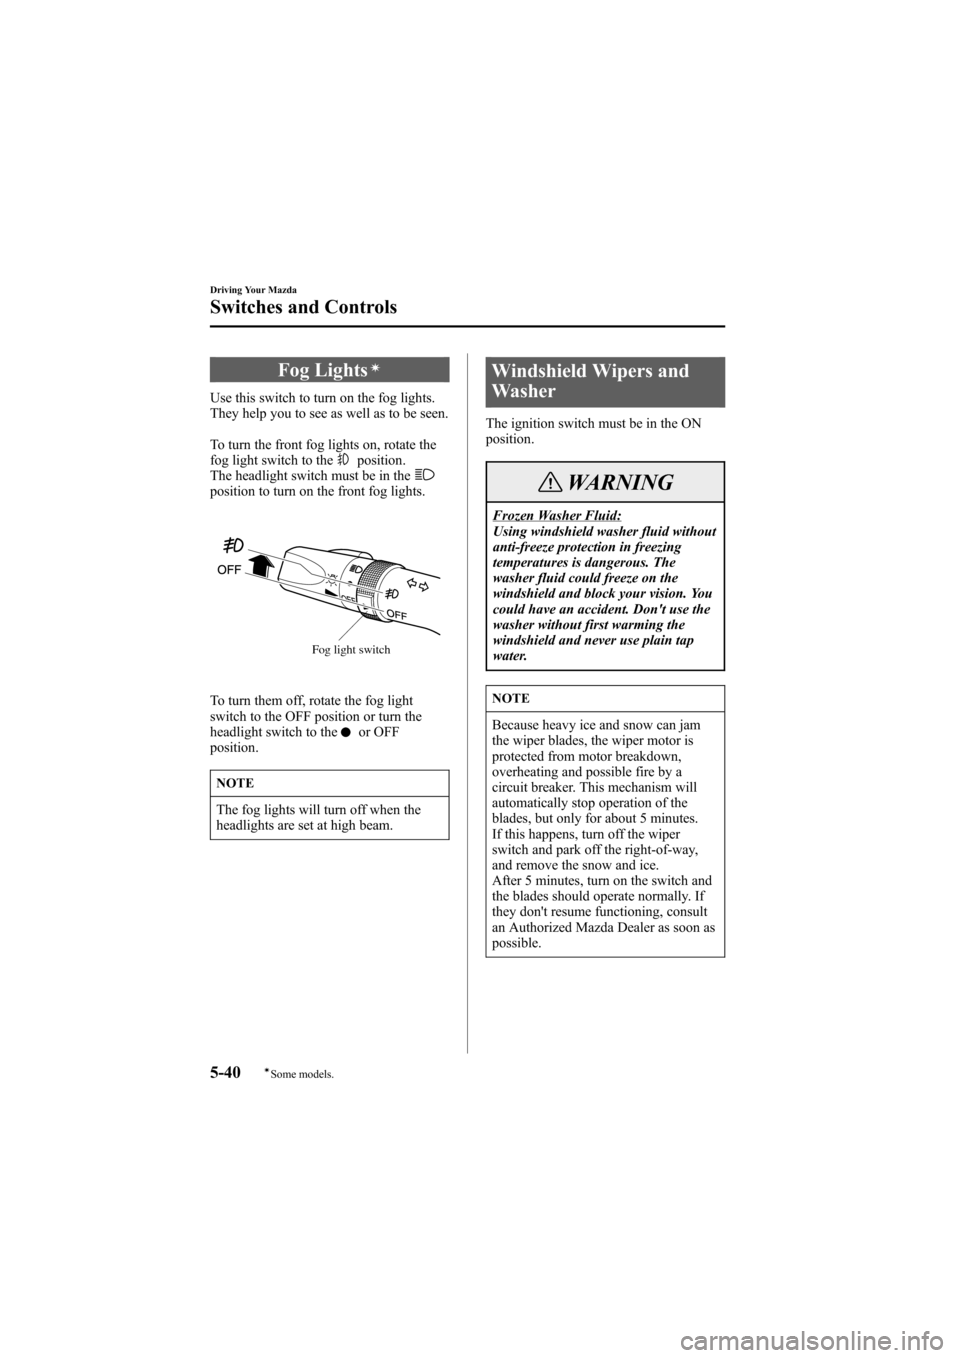 MAZDA MODEL 6 2005  Owners Manual (in English) Black plate (164,1)
Fog Lightsí
Use this switch to turn on the fog lights.
They help you to see as well as to be seen.
To turn the front fog lights on, rotate the
fog light switch to the
position.
Th